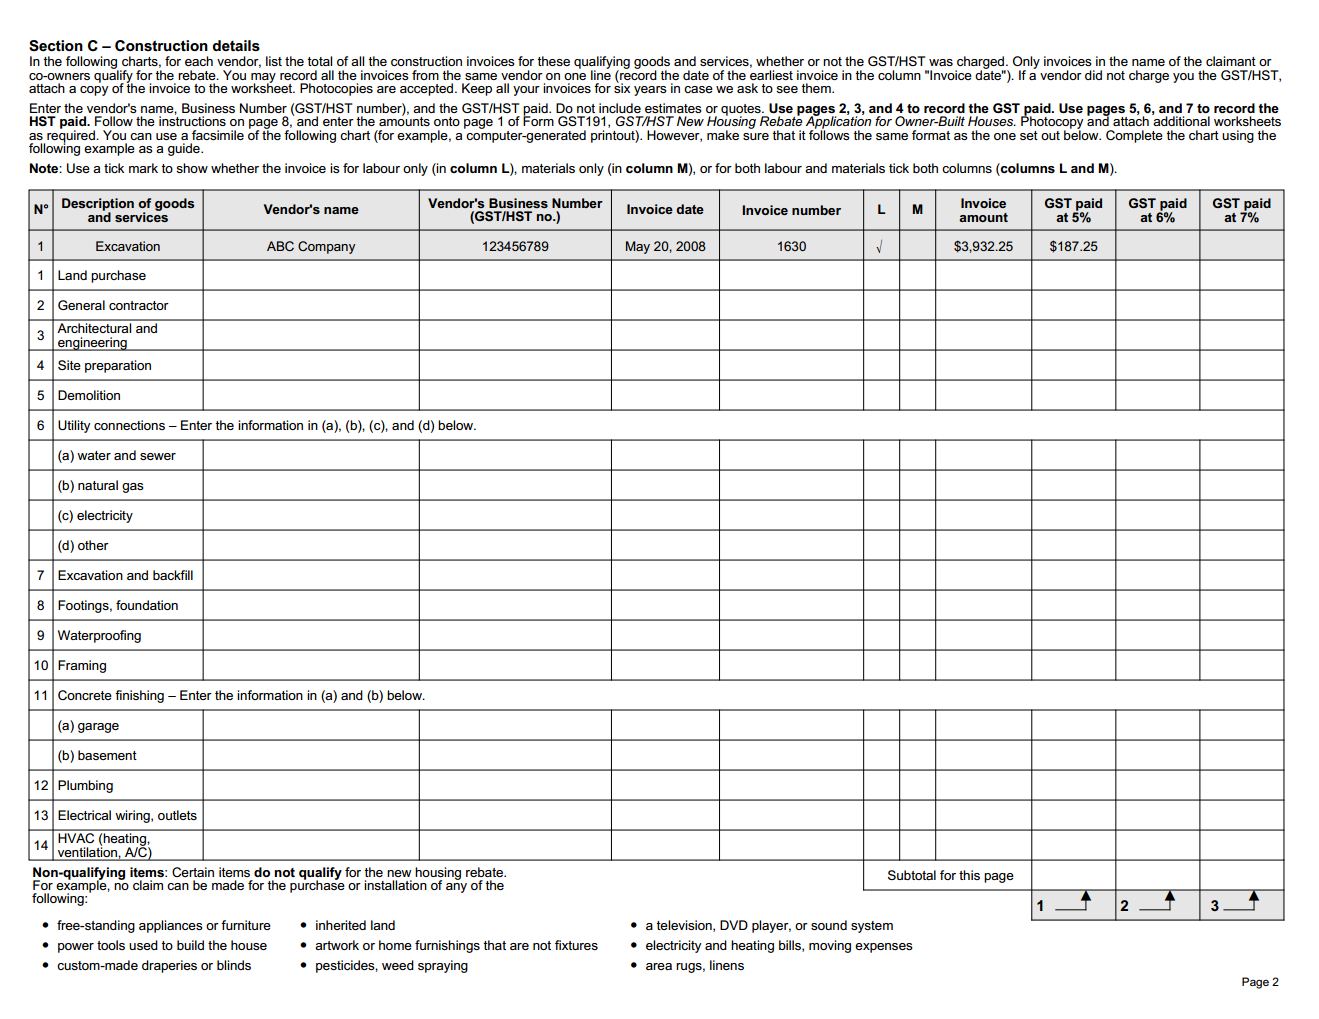 Page two of Revenue Canada form GST 191 WS